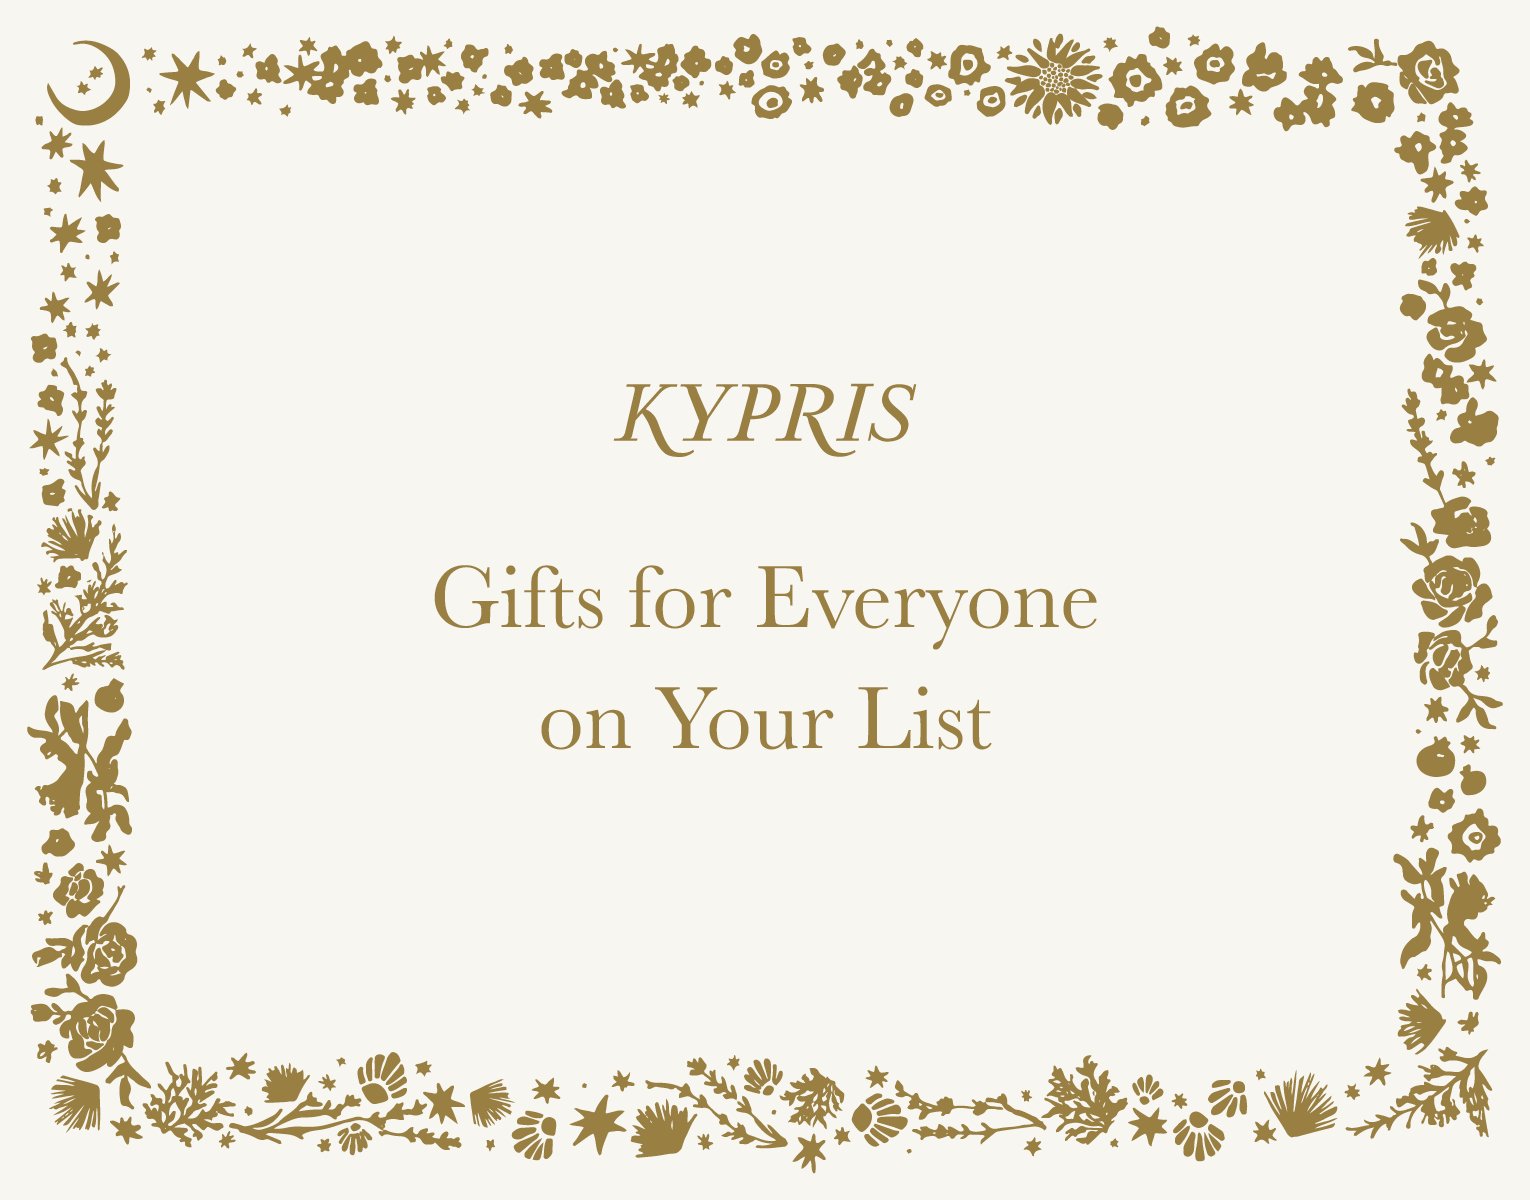 KYPRIS | Gifts for Everyone on Your List!